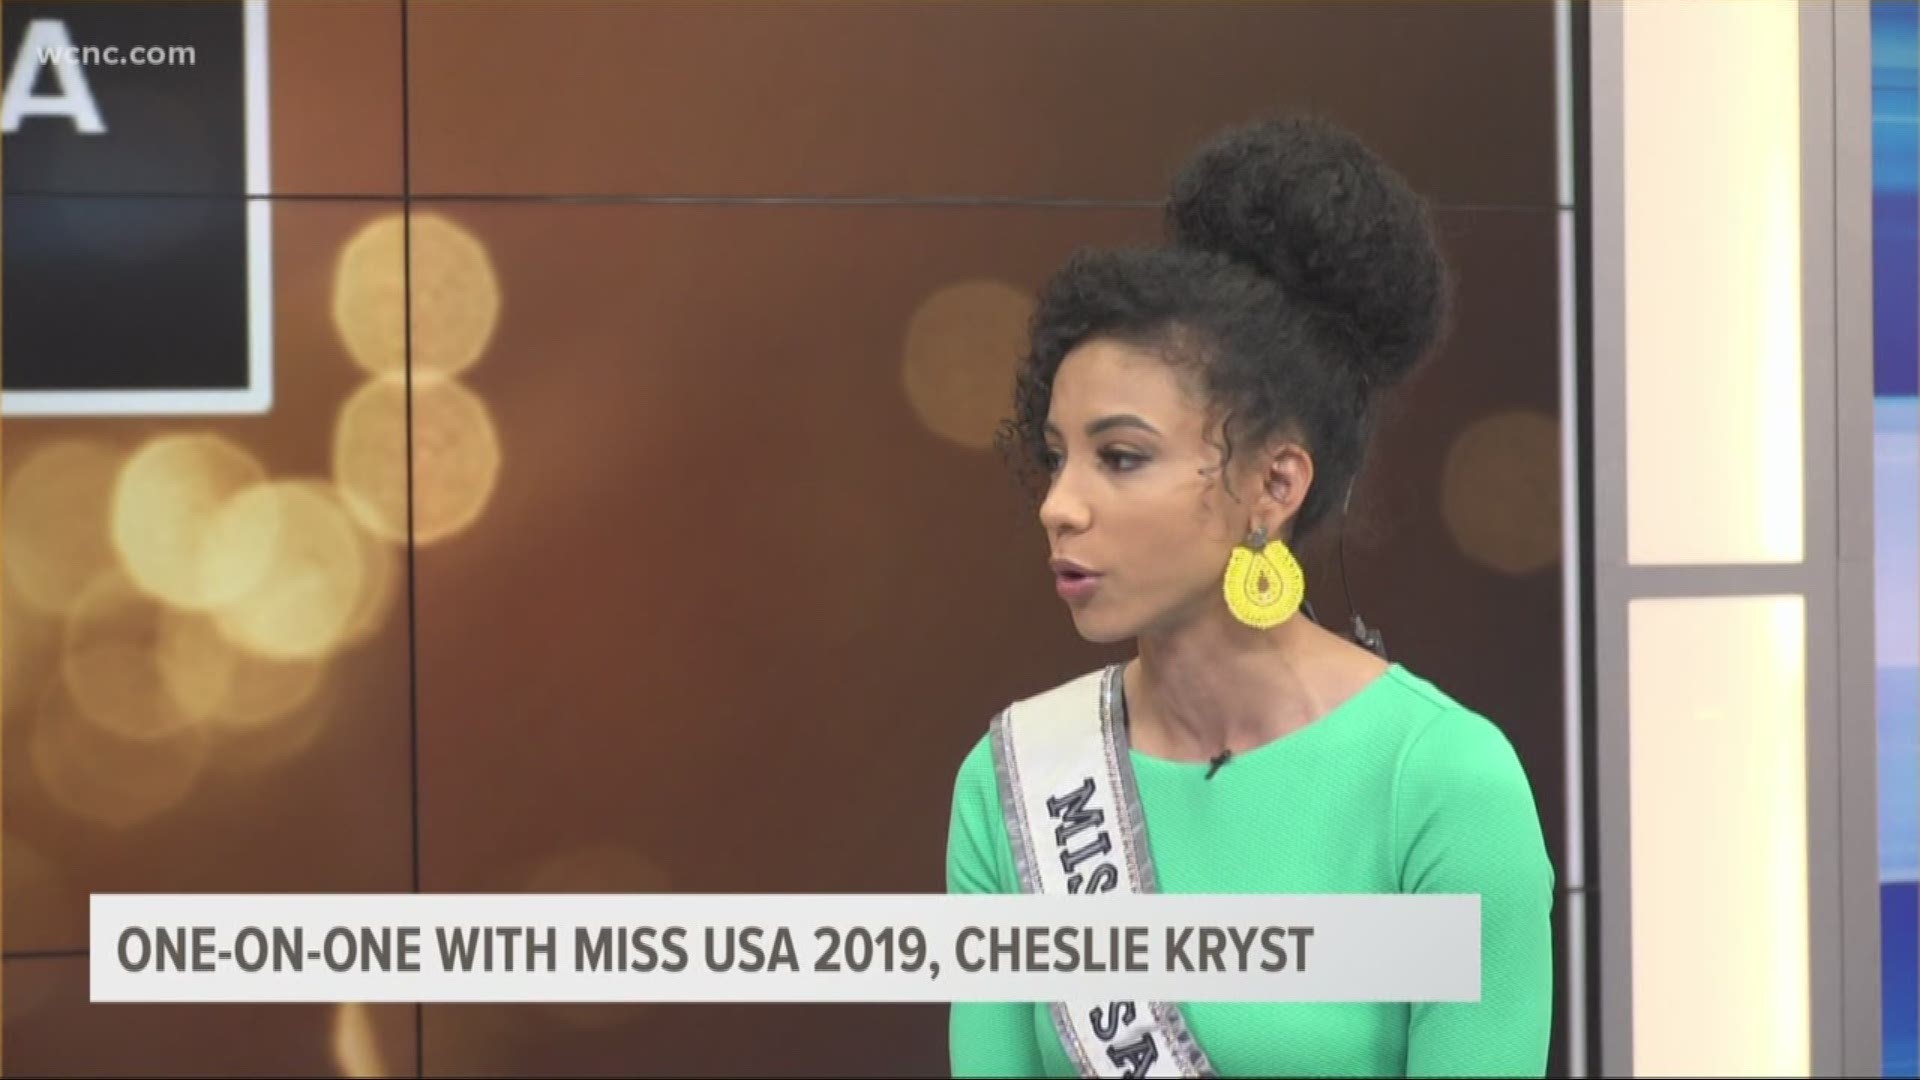 NBC Charlotte's Ruby Durham got a chance to sit down with Miss USA and find out what's been going on, and what she has planned for the future.